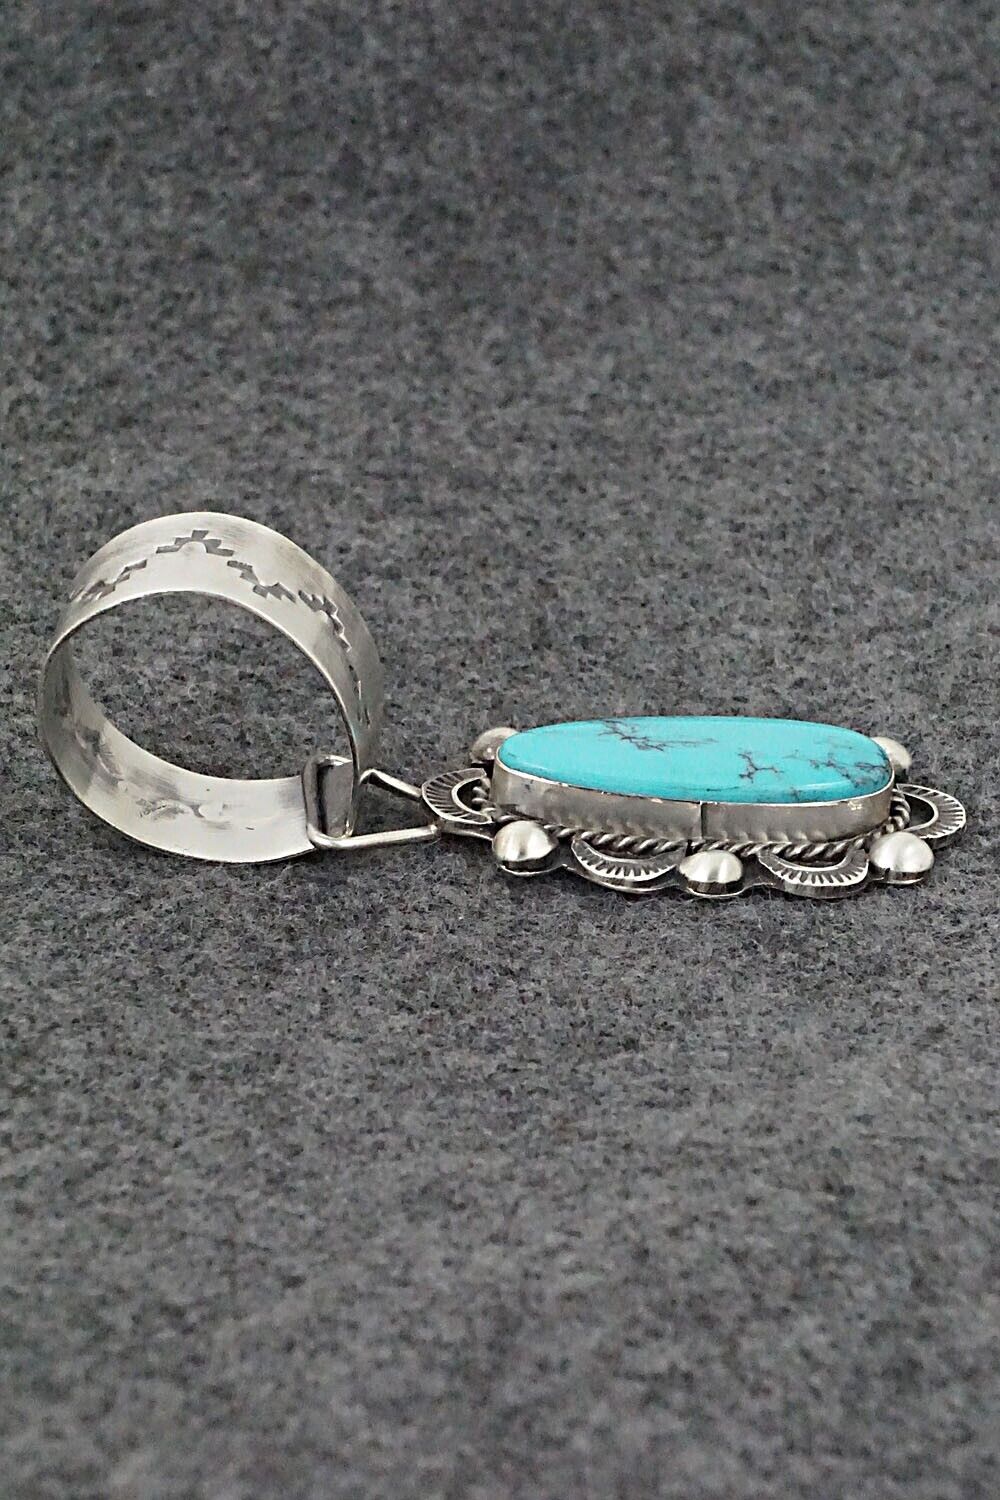 Turquoise and Sterling Silver Pendant - Wilson Dawes